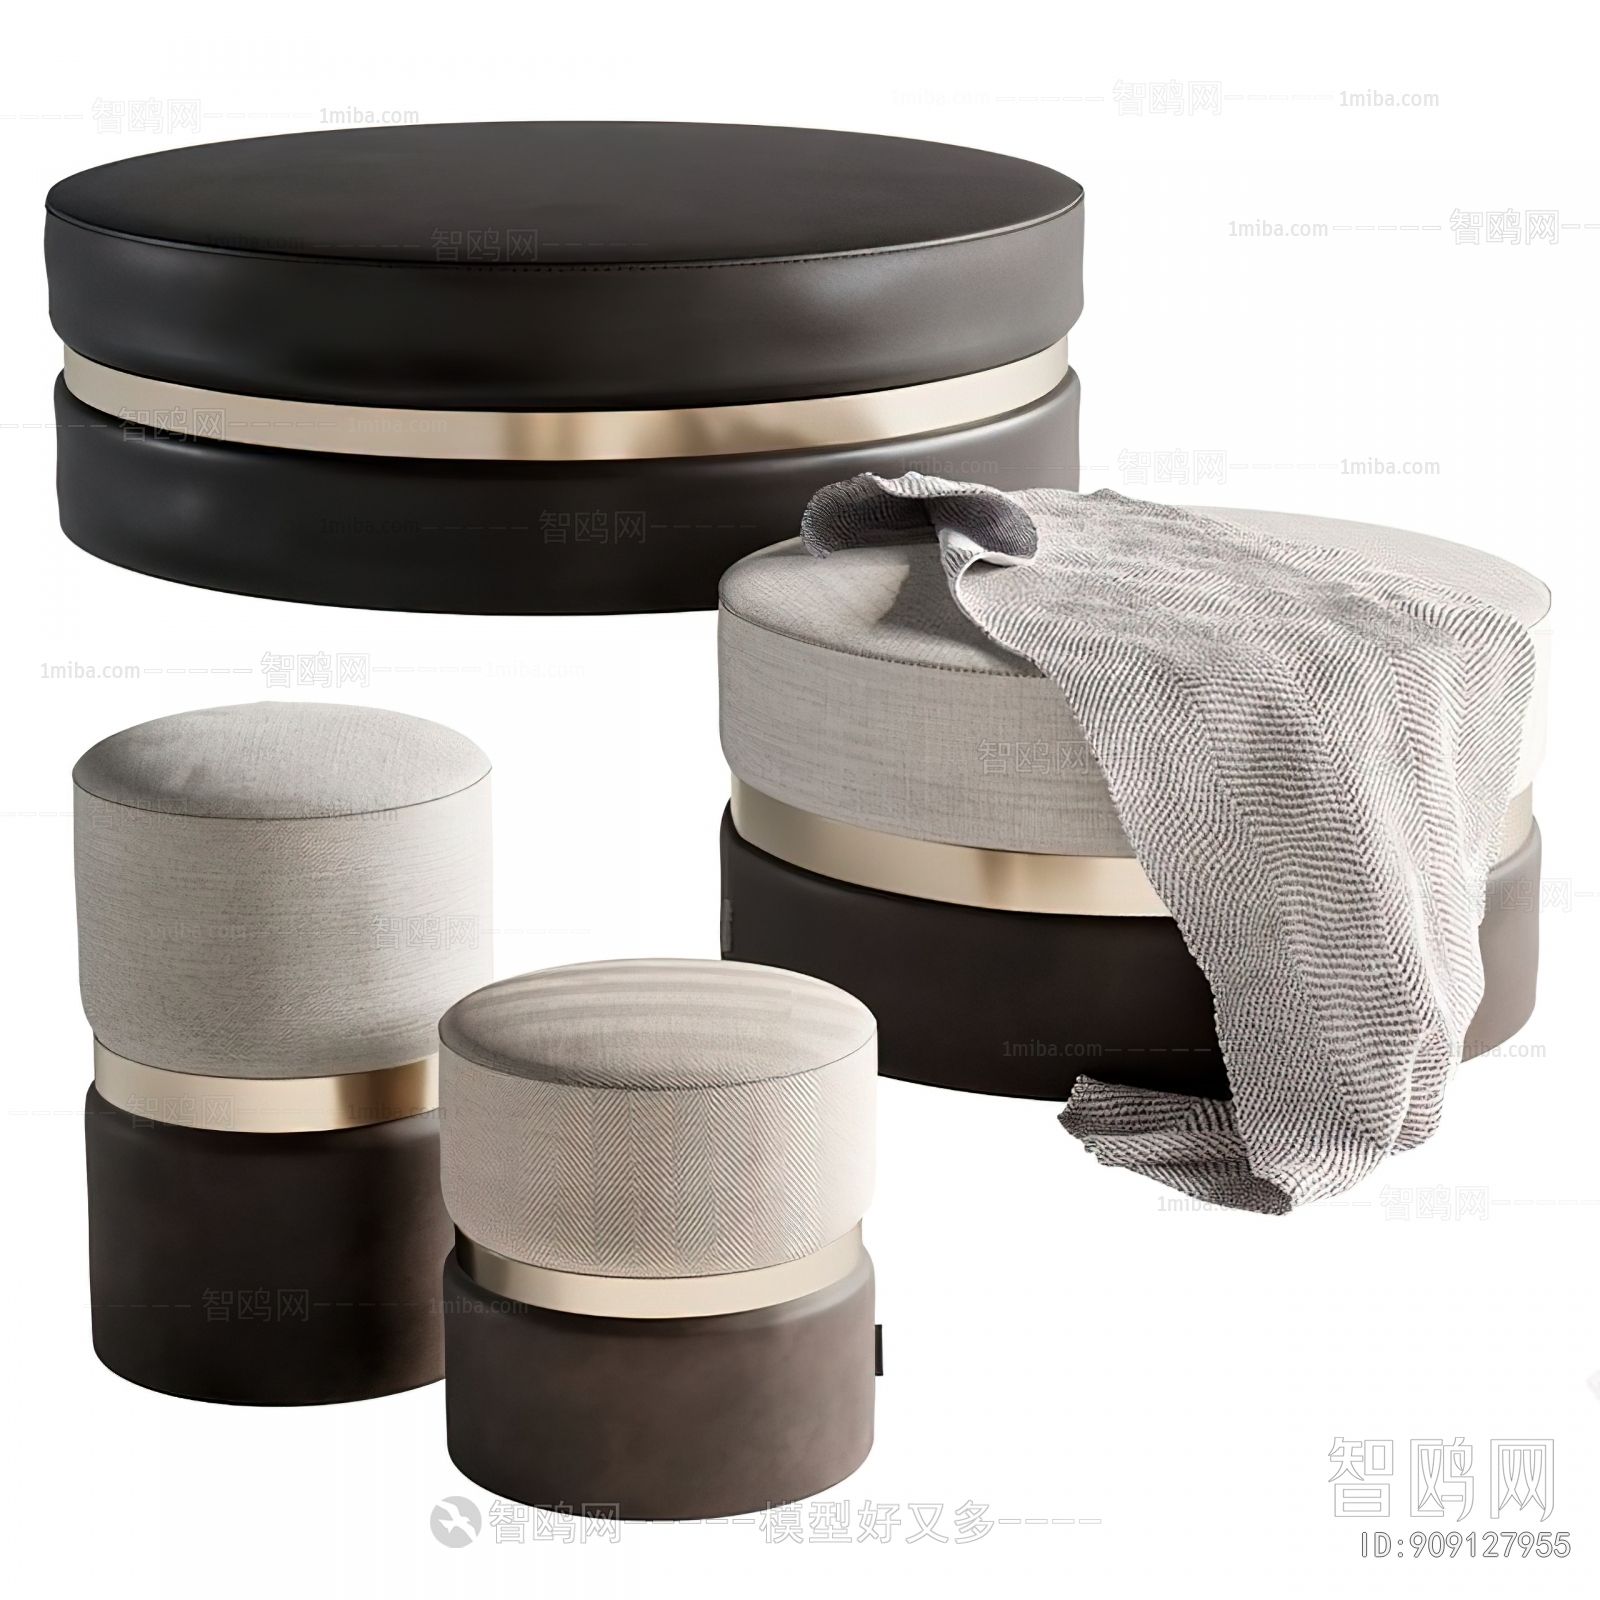 Modern Stool For Changing Shoes